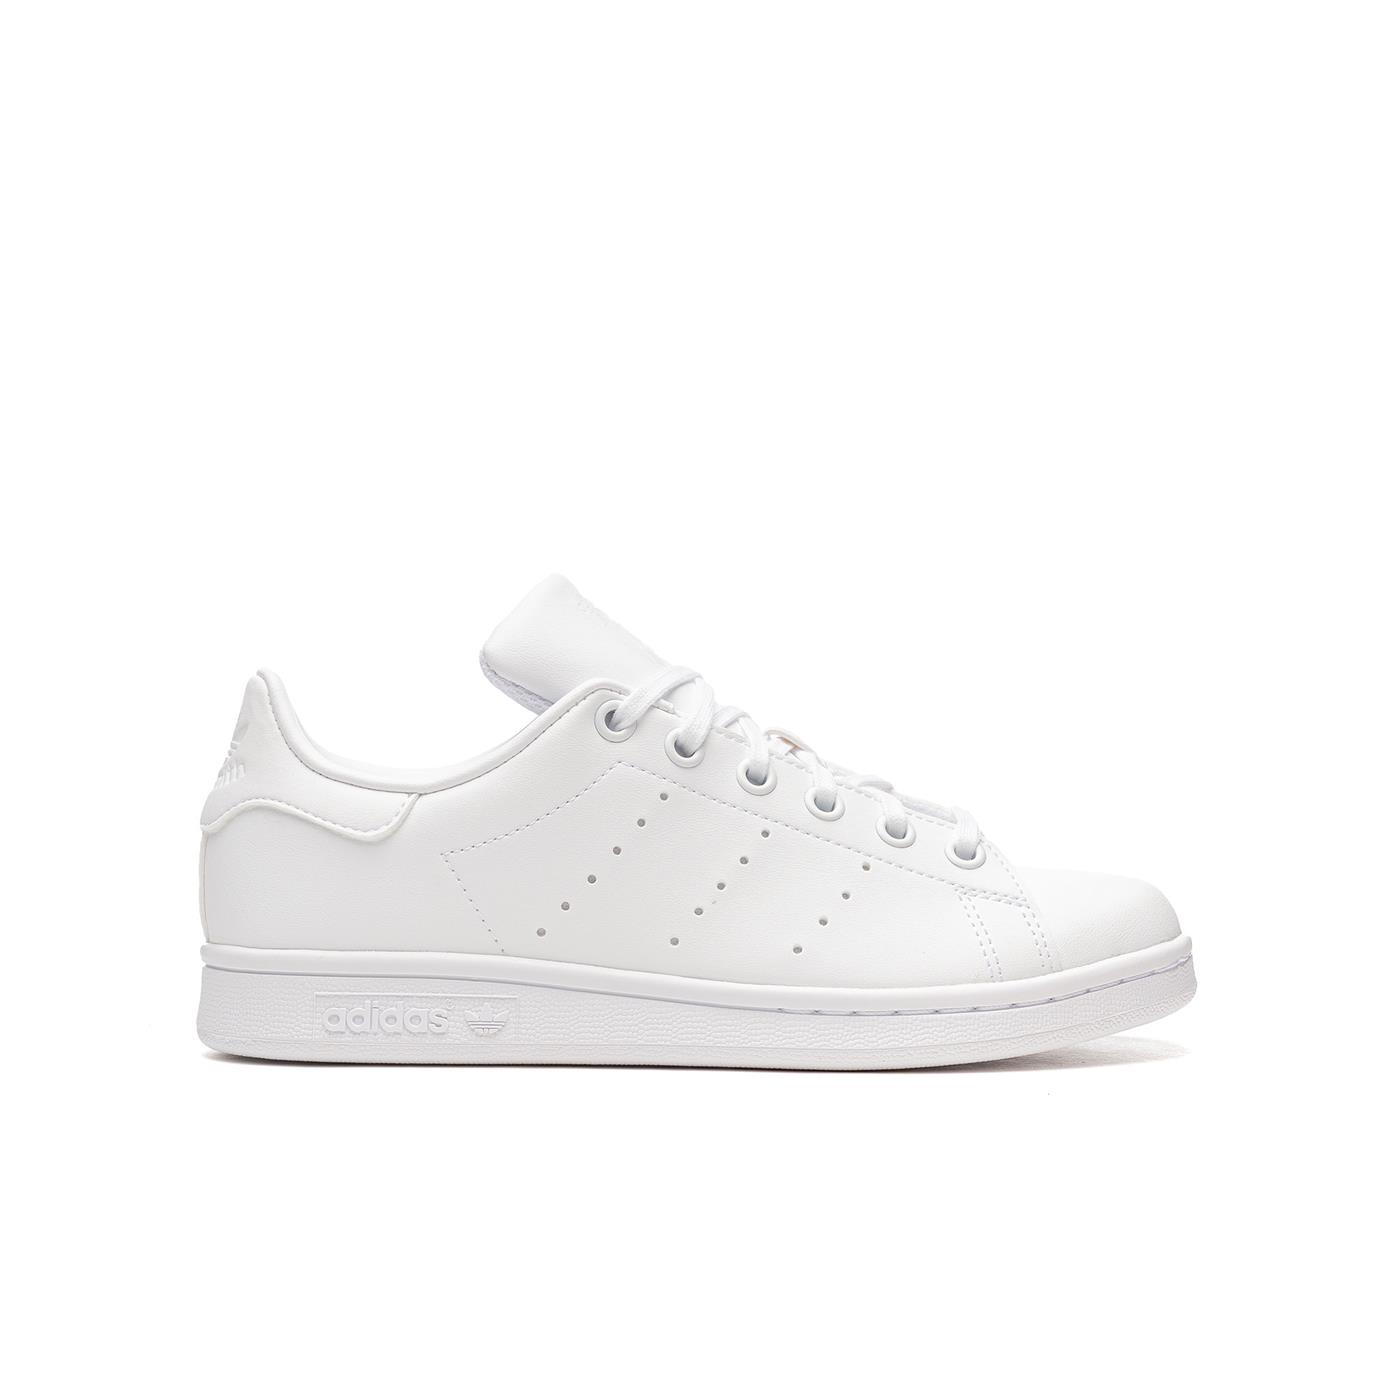 Experienced person shave Hold Sneakers adidas Originals Stan Smith J White for Junior | FX7520 | XTREME.PT